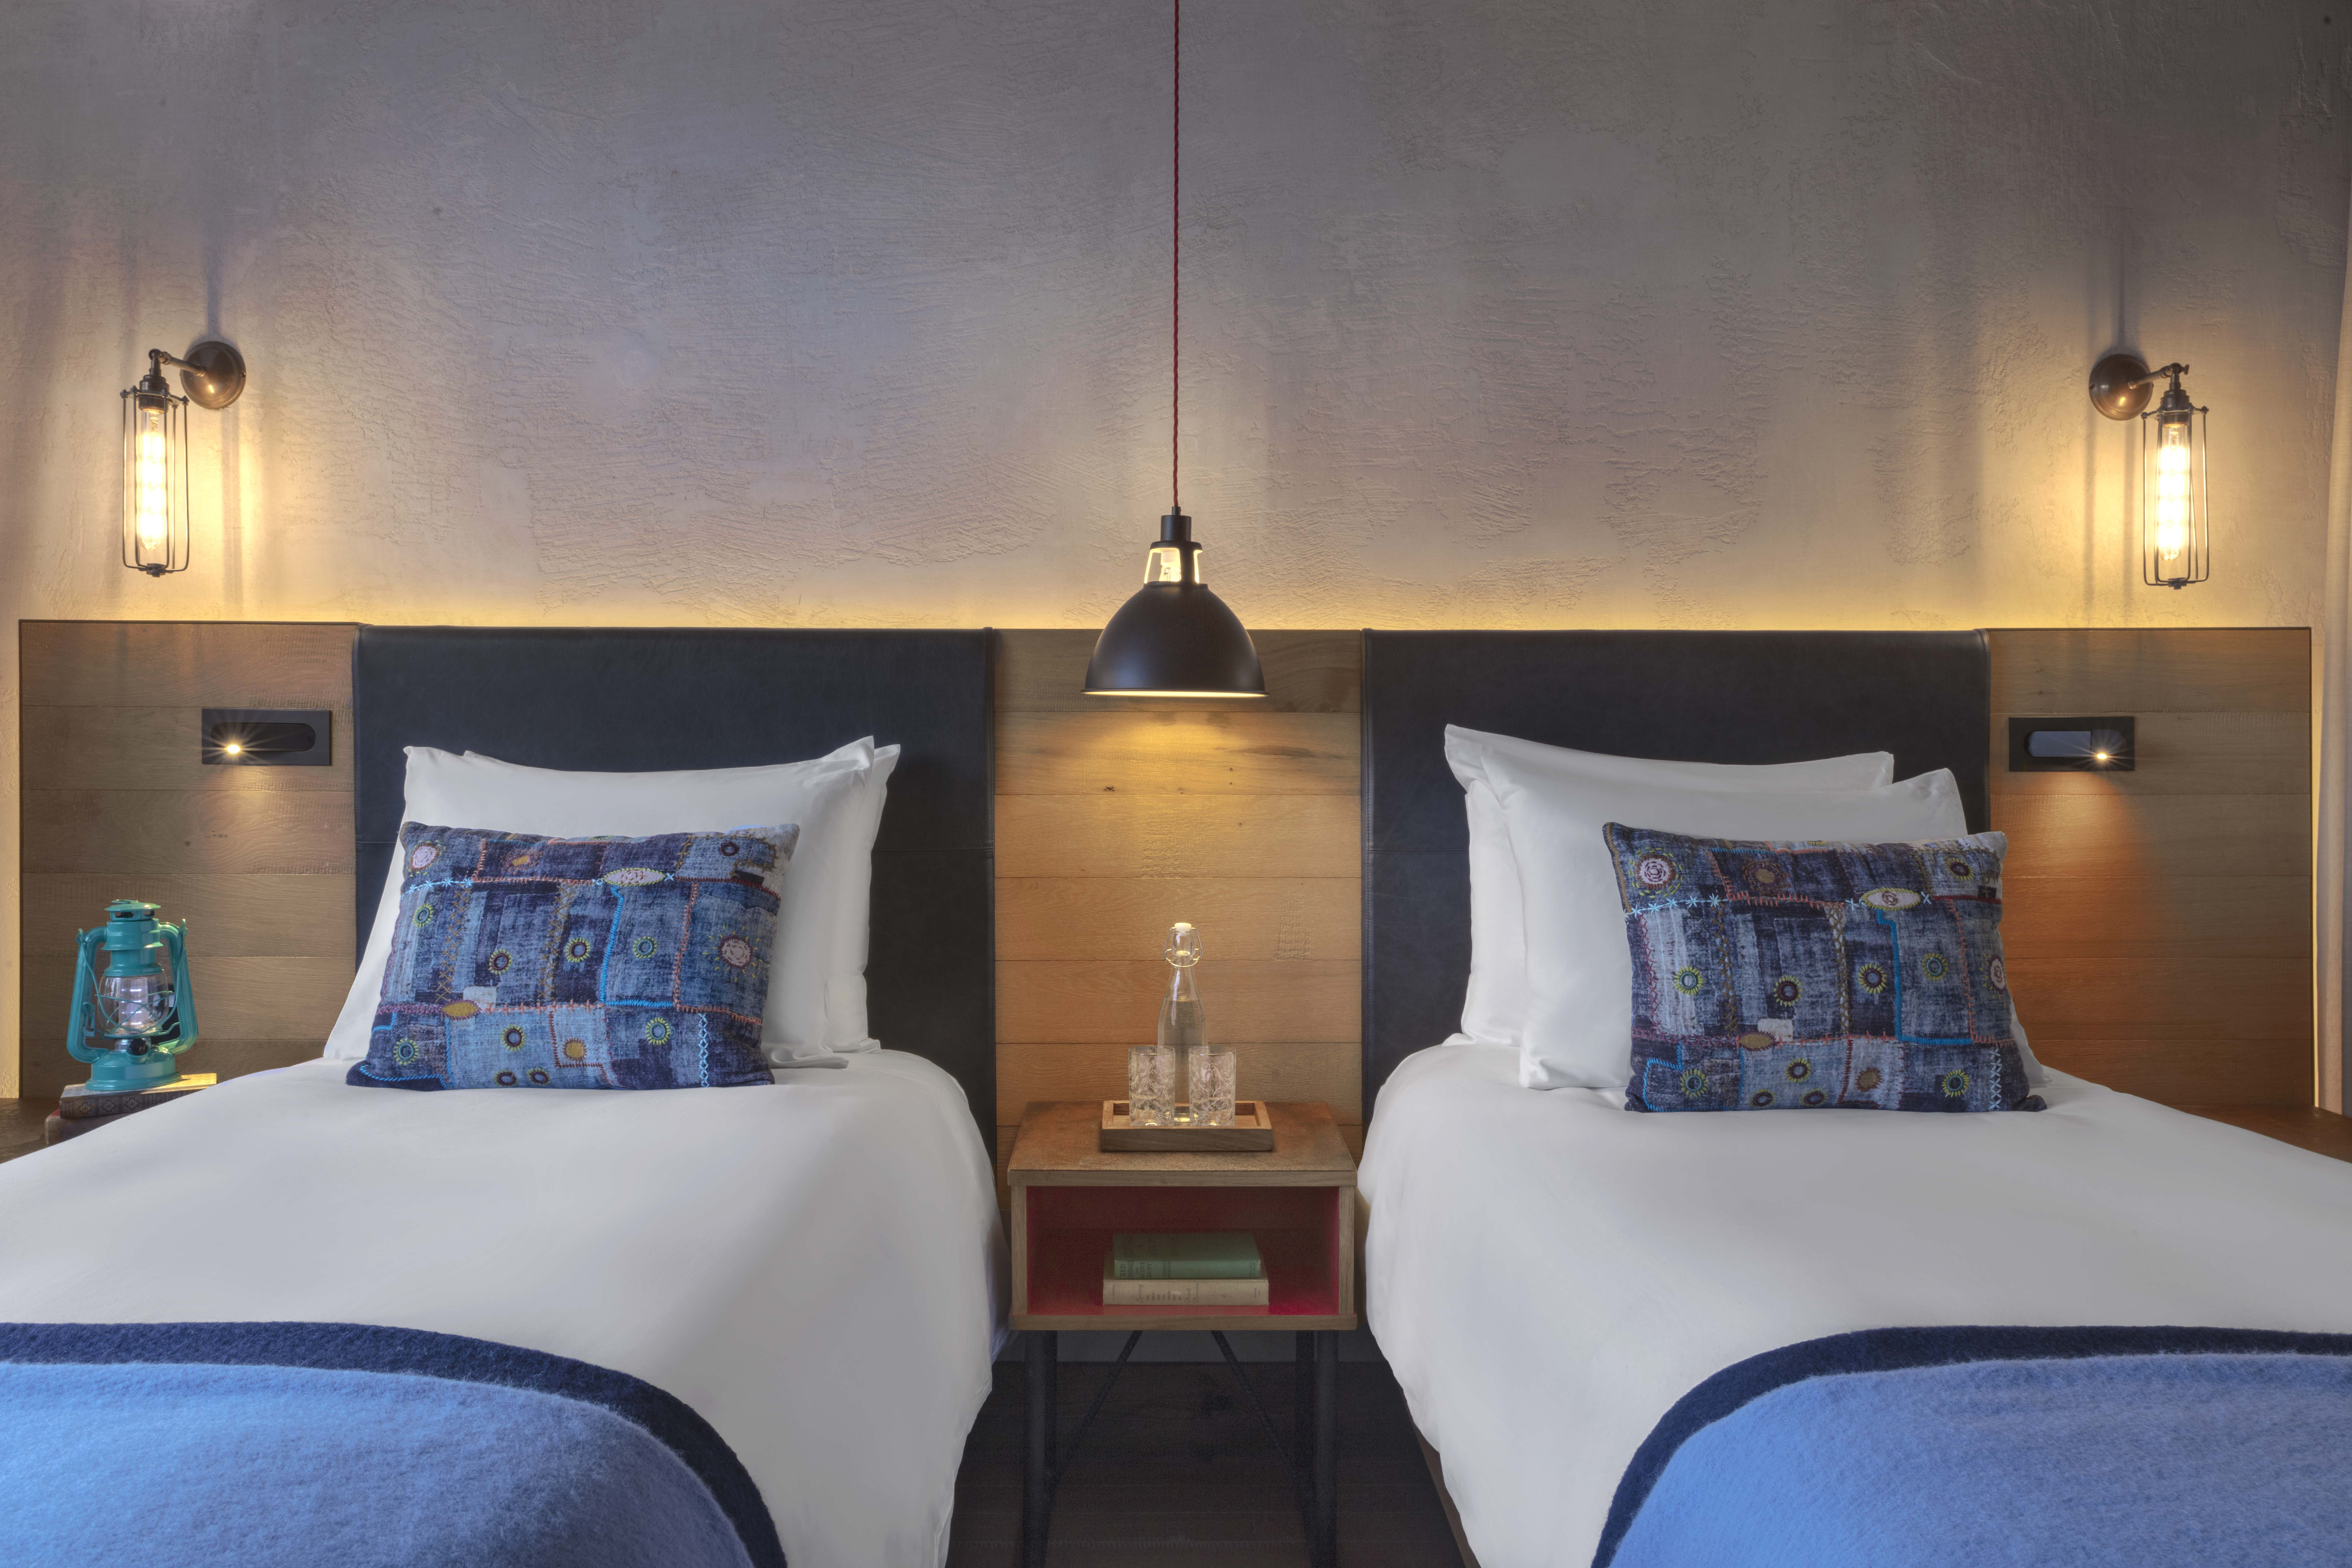 Treehouse Hotel London – Boutique hotels